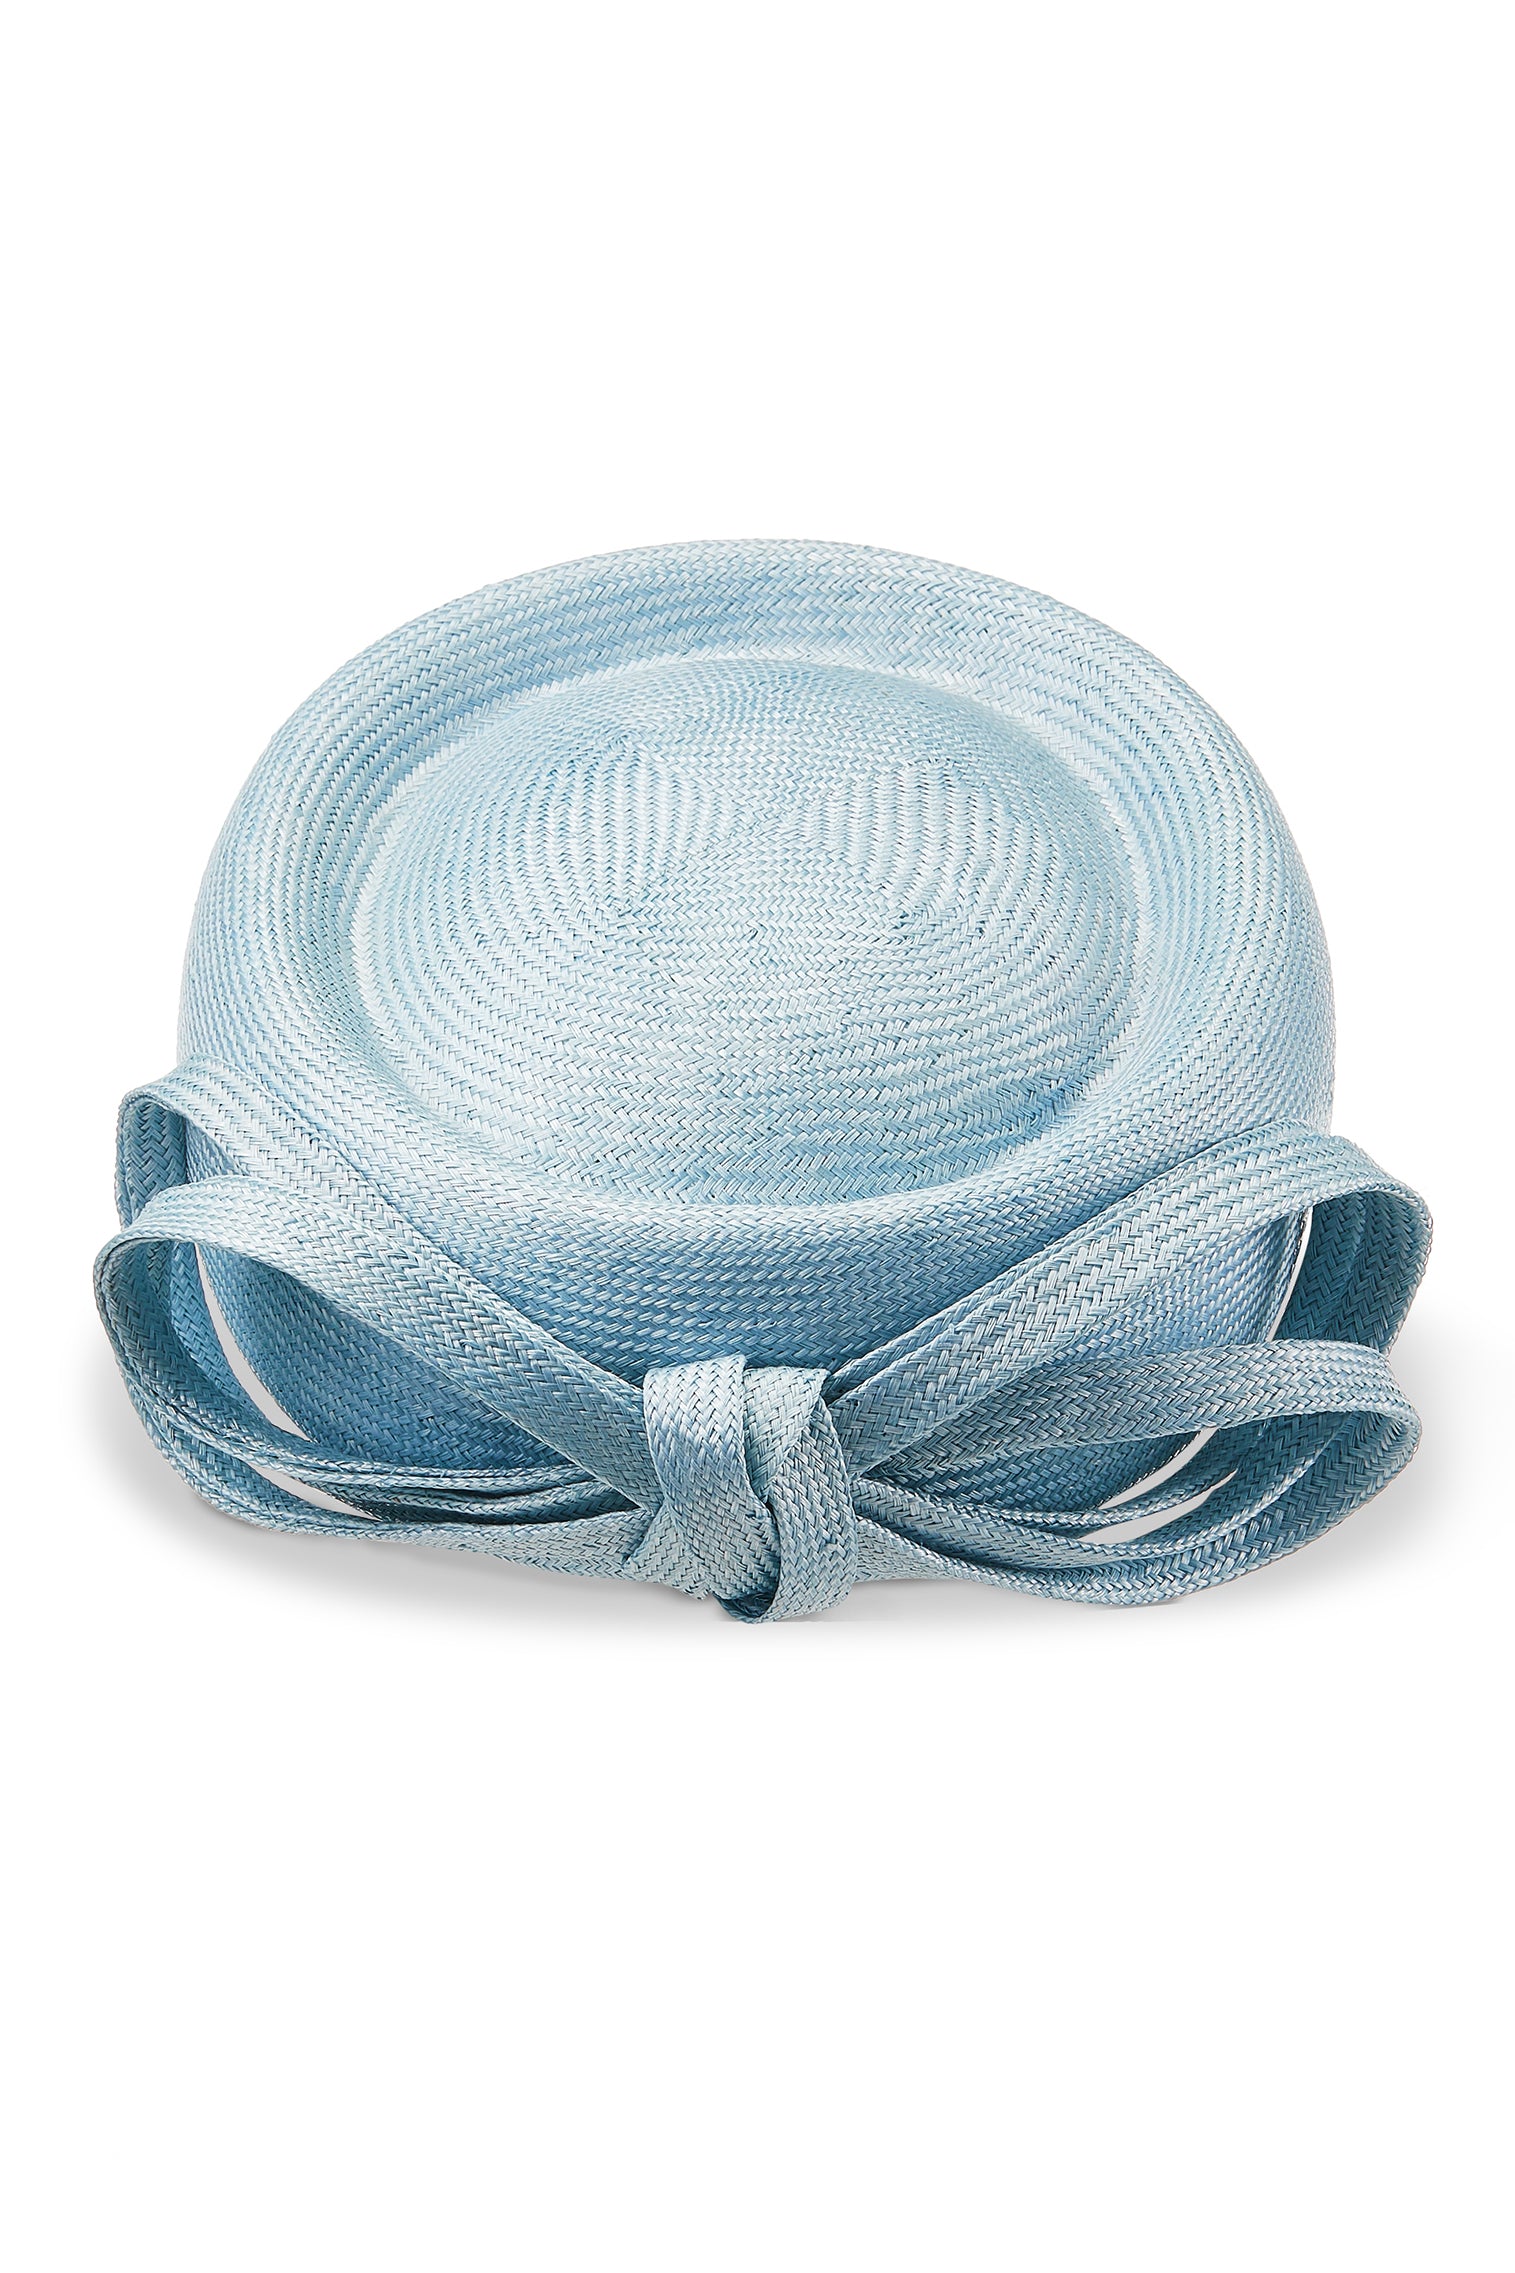 Verbena Pale Blue Pillbox Hat - Lock Couture by Awon Golding - Lock & Co. Hatters London UK